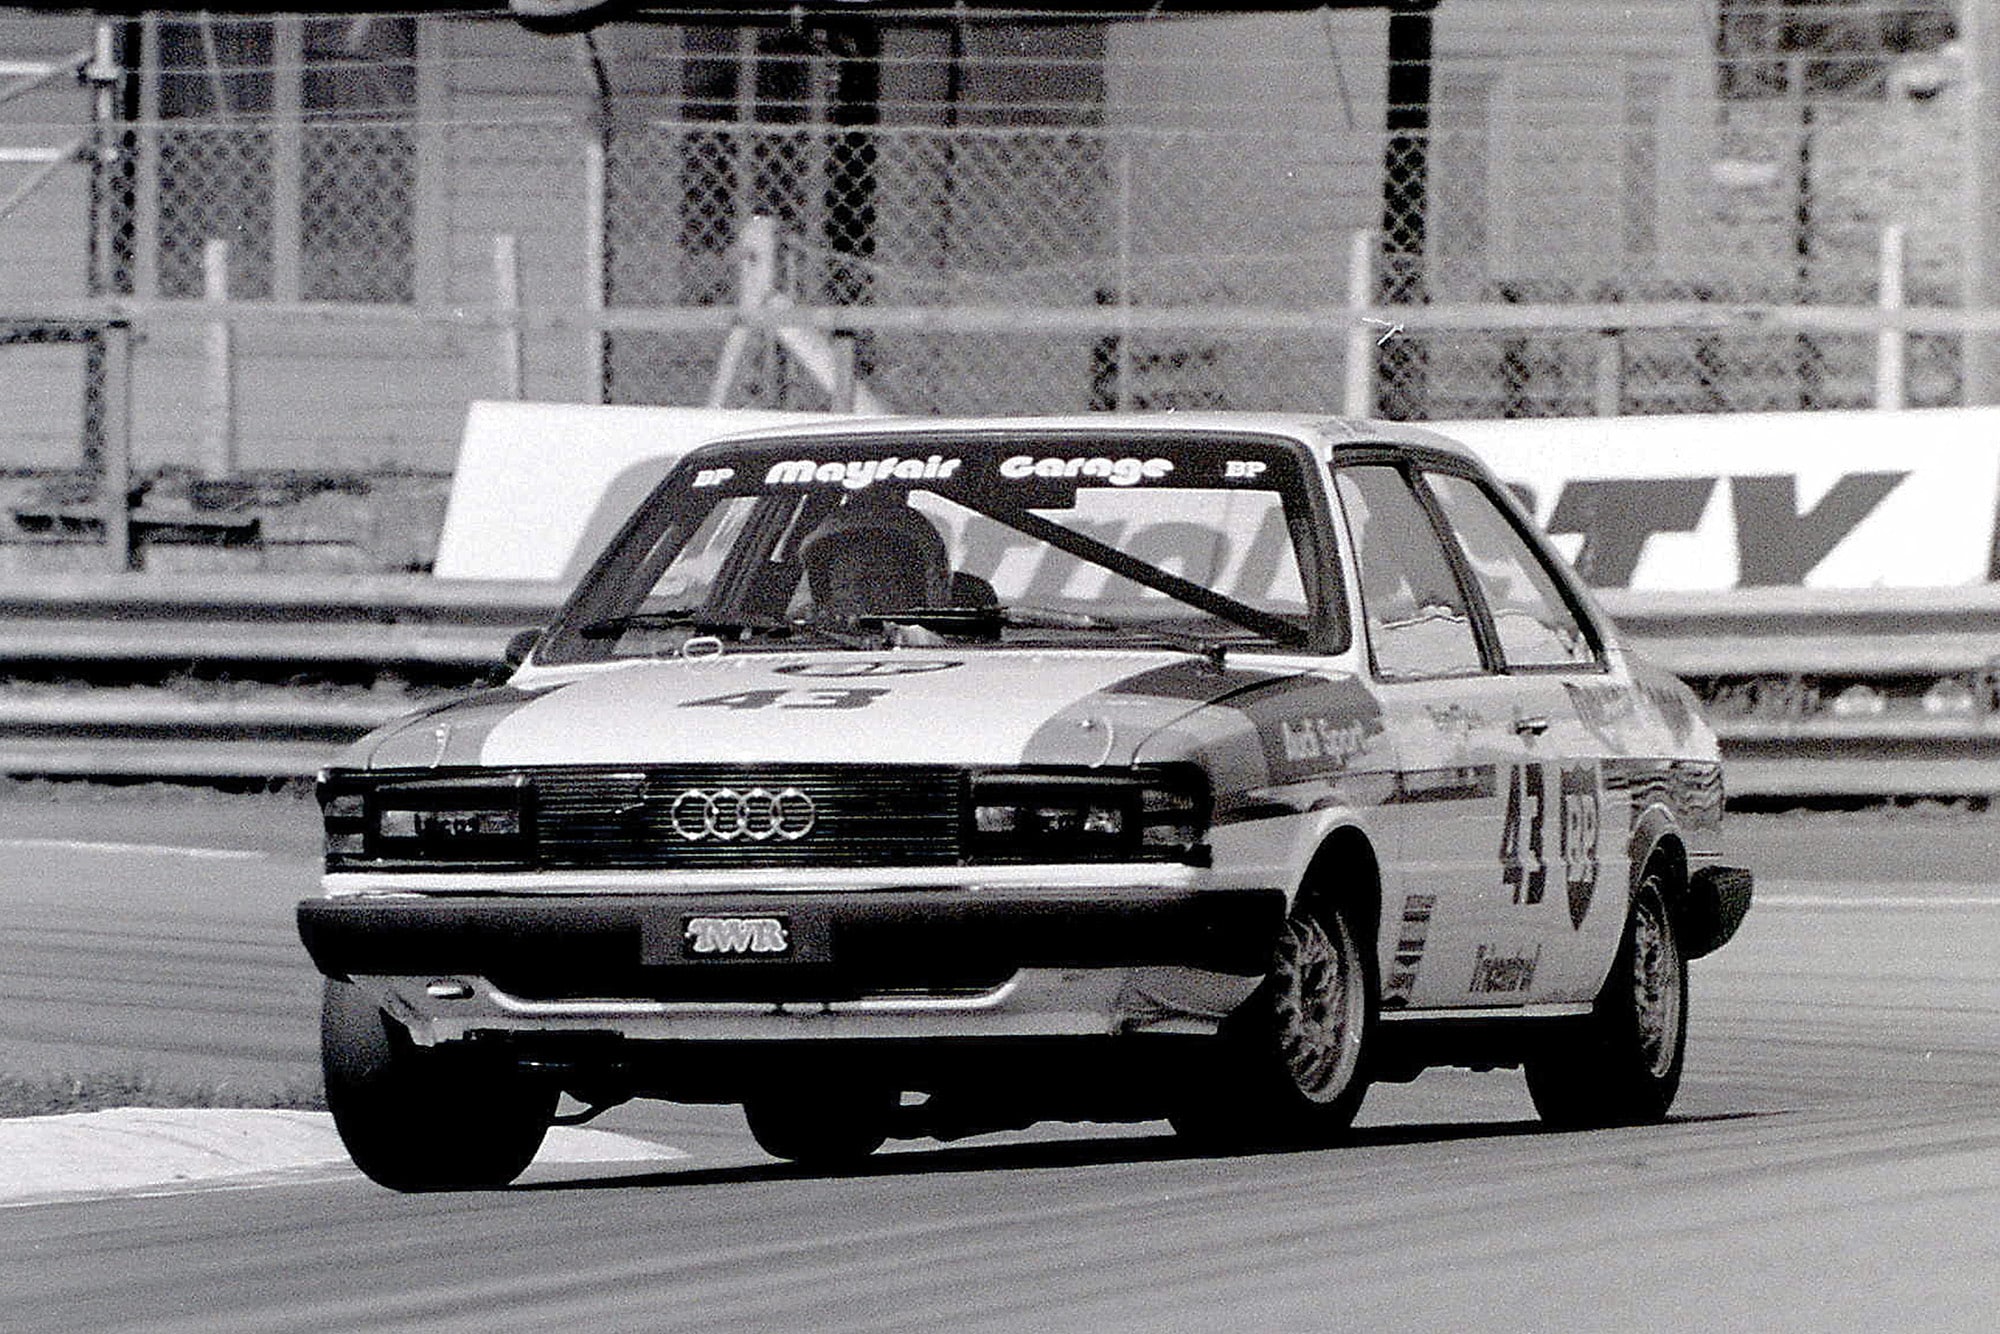 Stirling Moss in an Audi 80 at Oulton Park racing in the 1981 British Saloon Car Championship